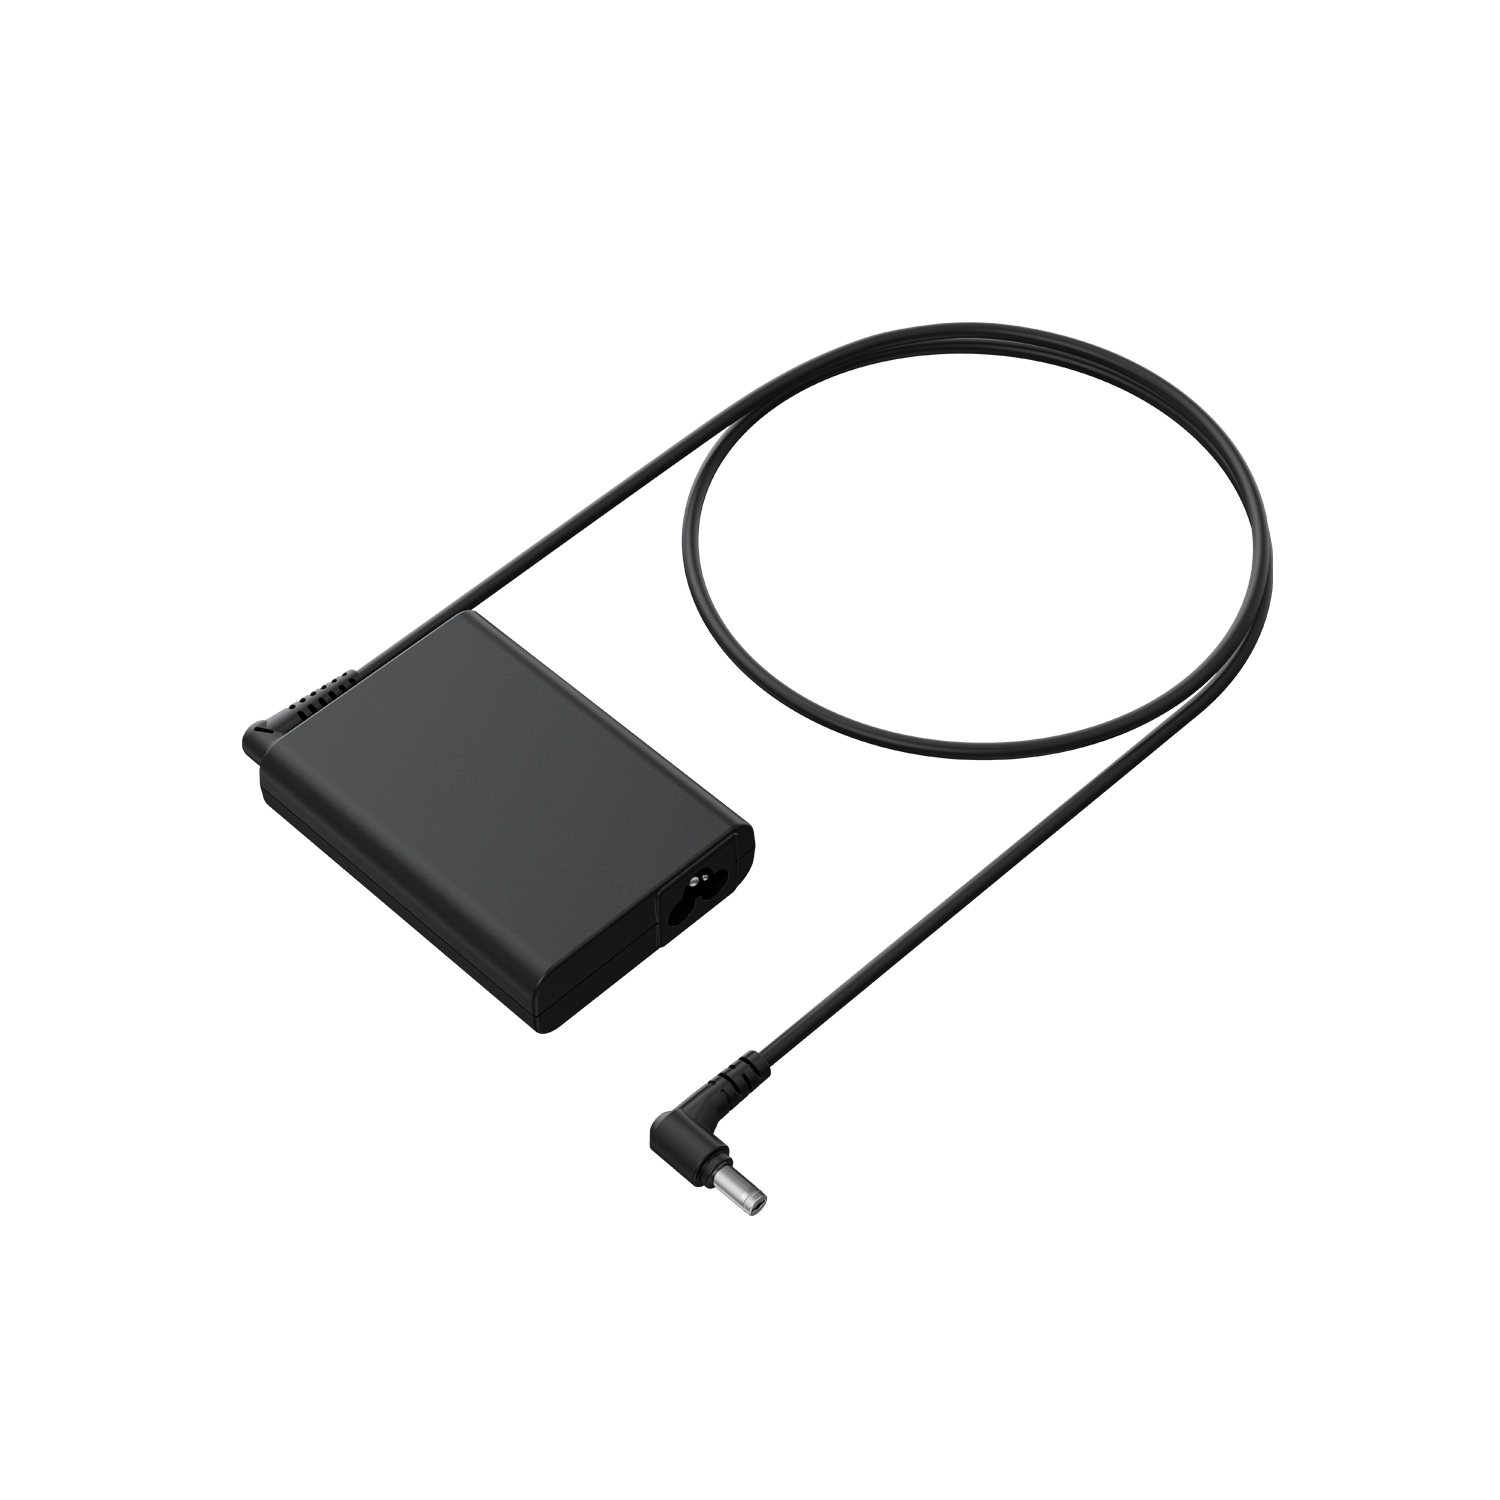 xencelabs AC Power Adapter with L-shaped connector